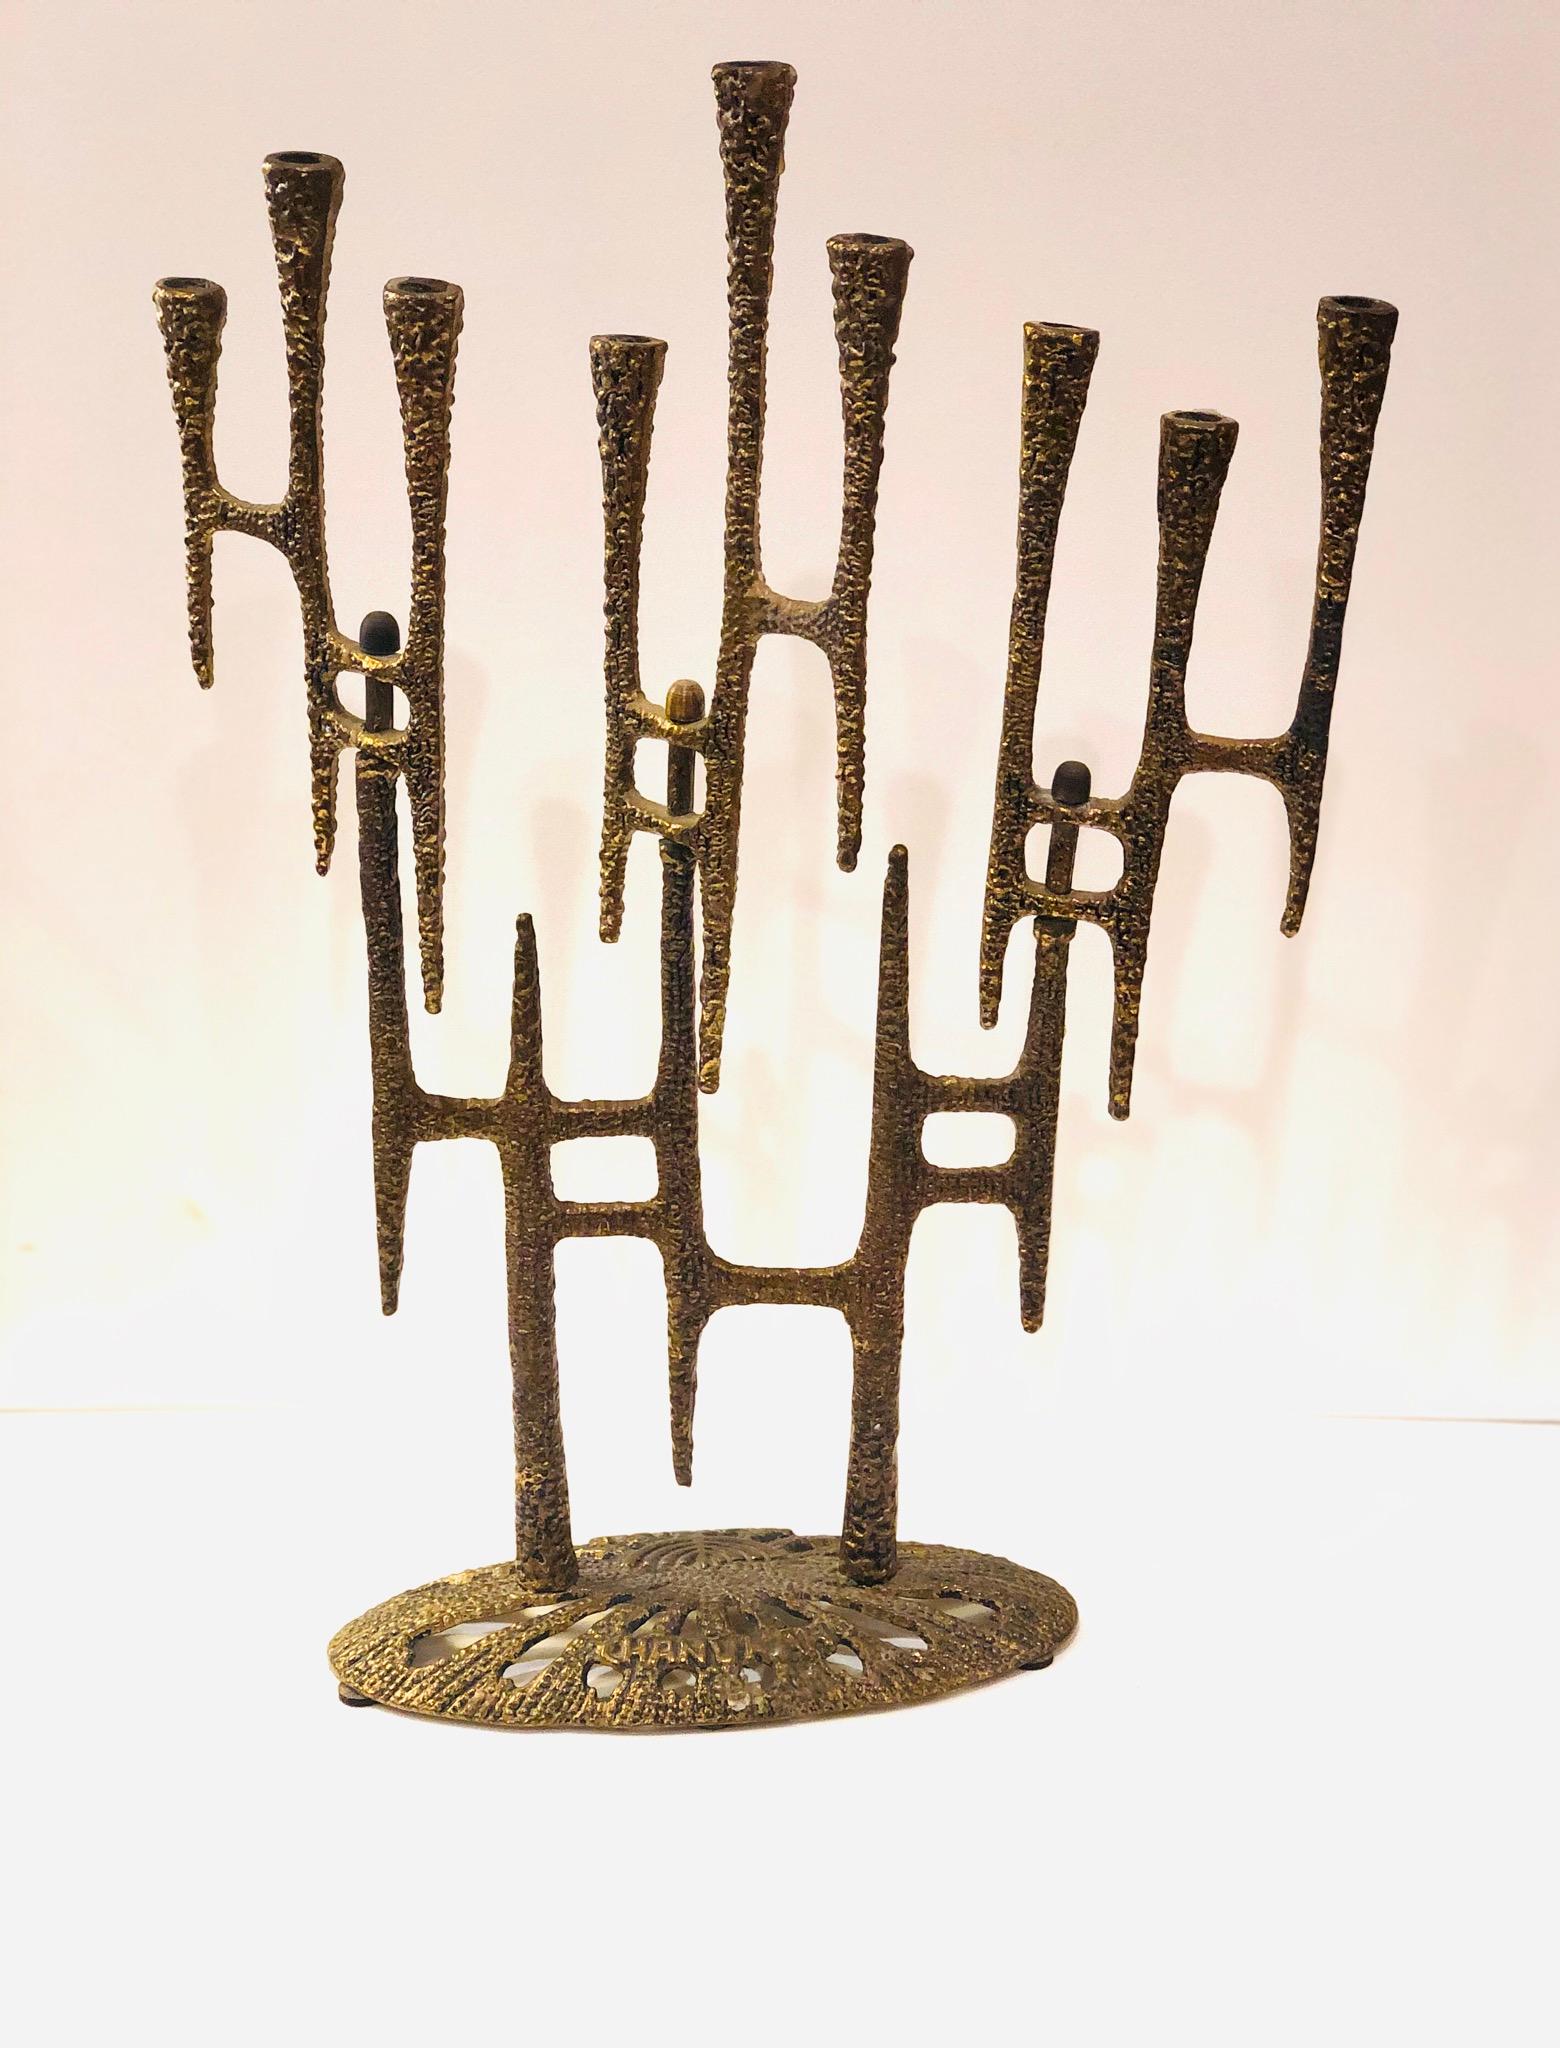 Rare and Brutalist pattern menorah with beaded texture to brass metal, 3 sets of 3 candle cups that are free to rotate at an axis, each cup hole is over 1/4 inch in diameter
Signature: underside marked Weinberg, made in Israel, base marked